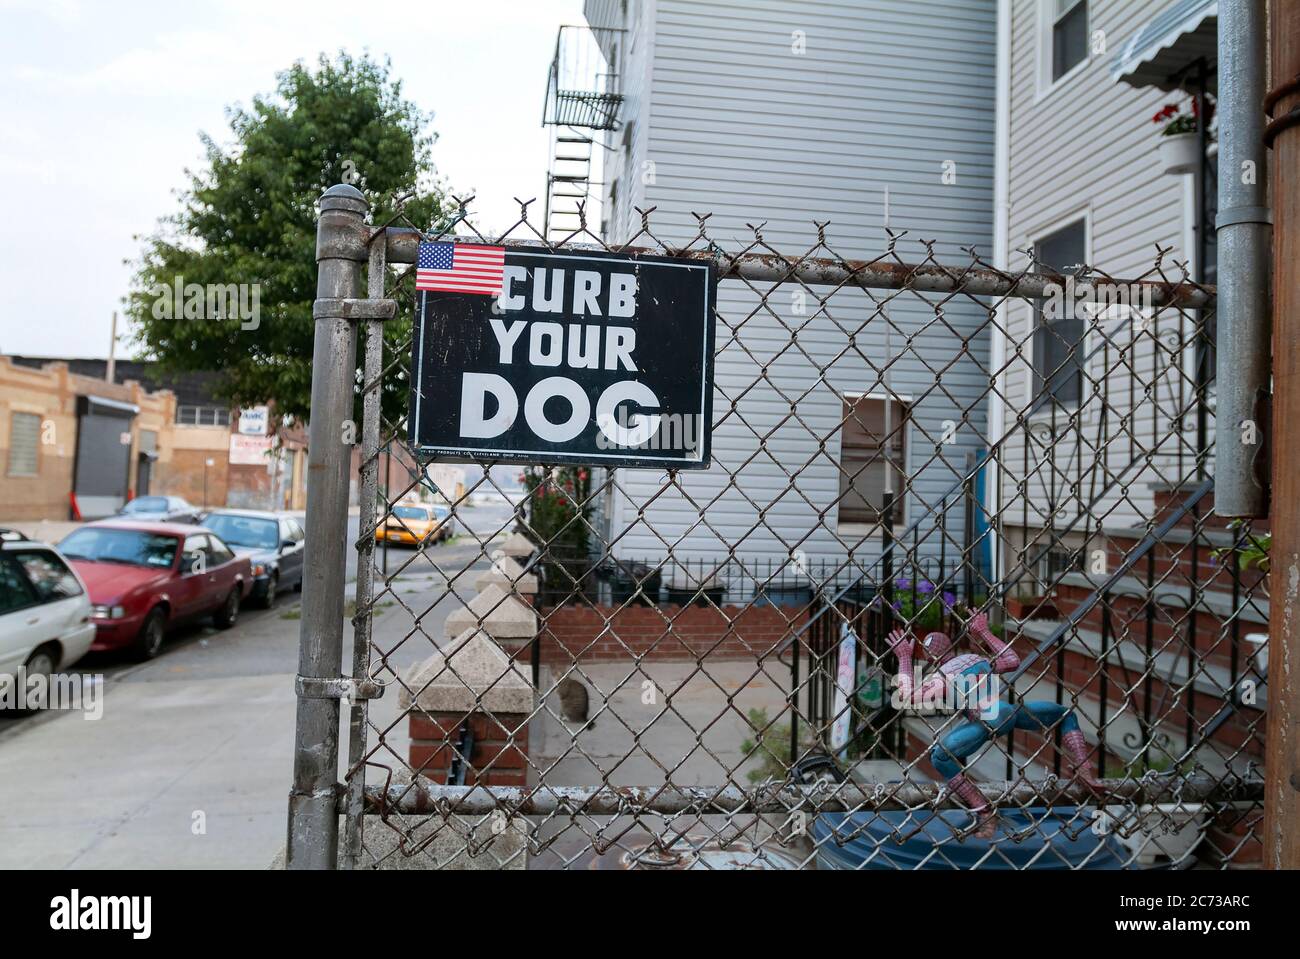 American flag on ‘Curb Your Dog’ sign. Stock Photo